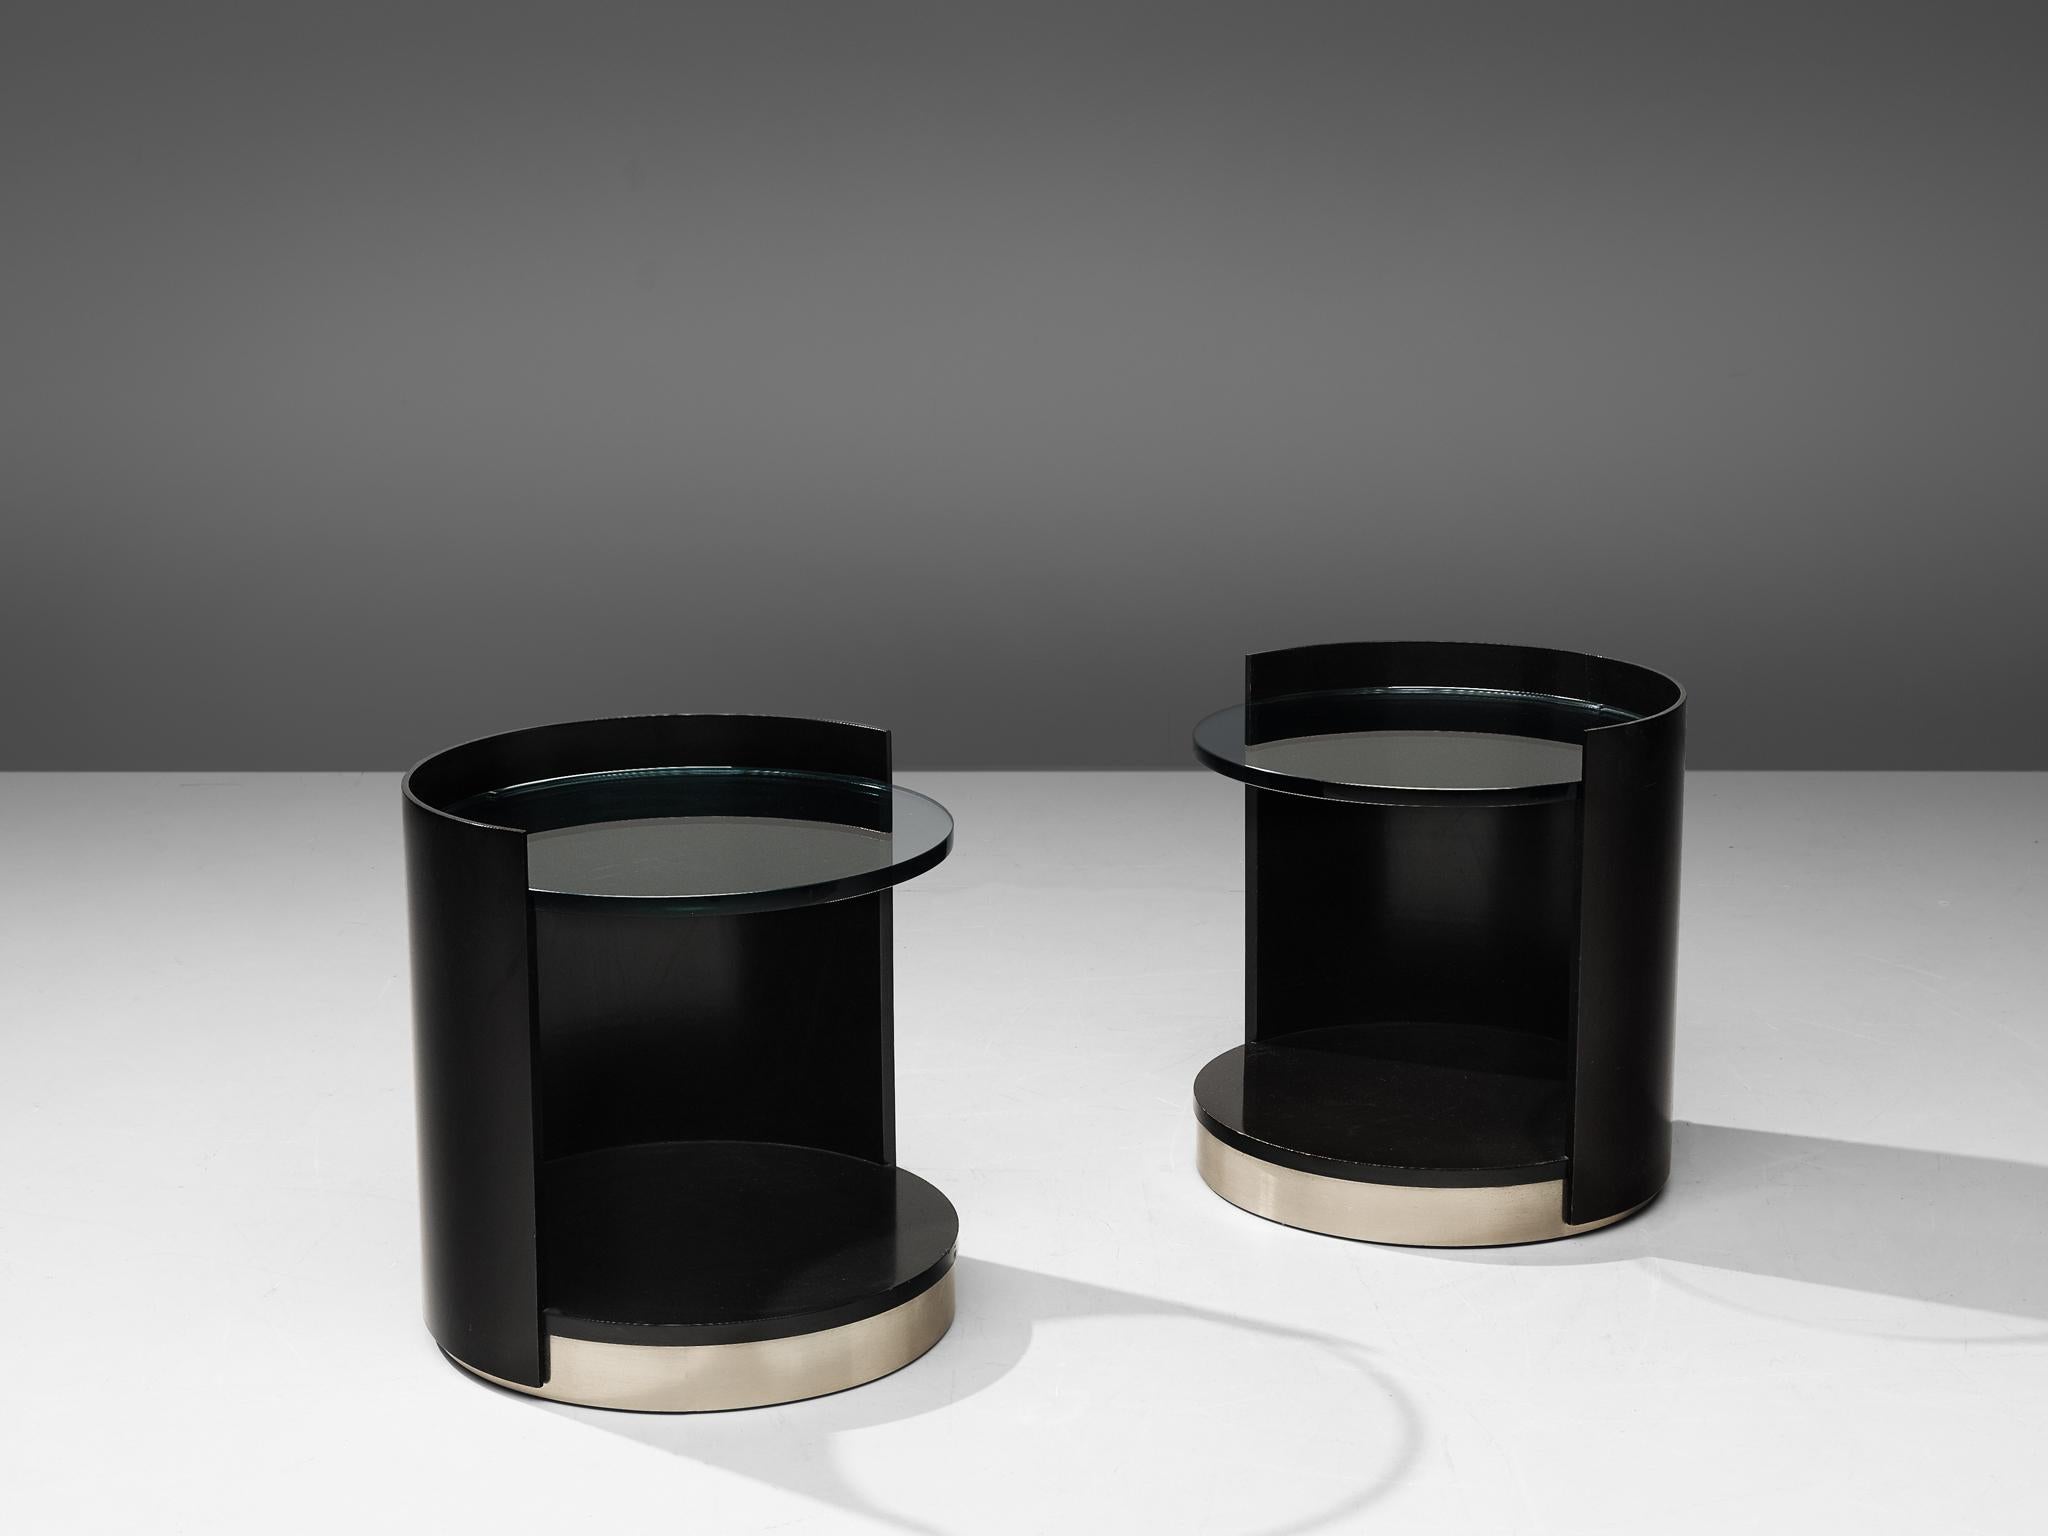 Gianni Moscatelli for Formanova, pair of side tables, wood, glass and metal, Italy, 1970s

Postmodern pair of nightstands by Gianni Moscatelli for Formanova. The tables have a cylindrical shape, featuring a black lacquered wood frame that's open on